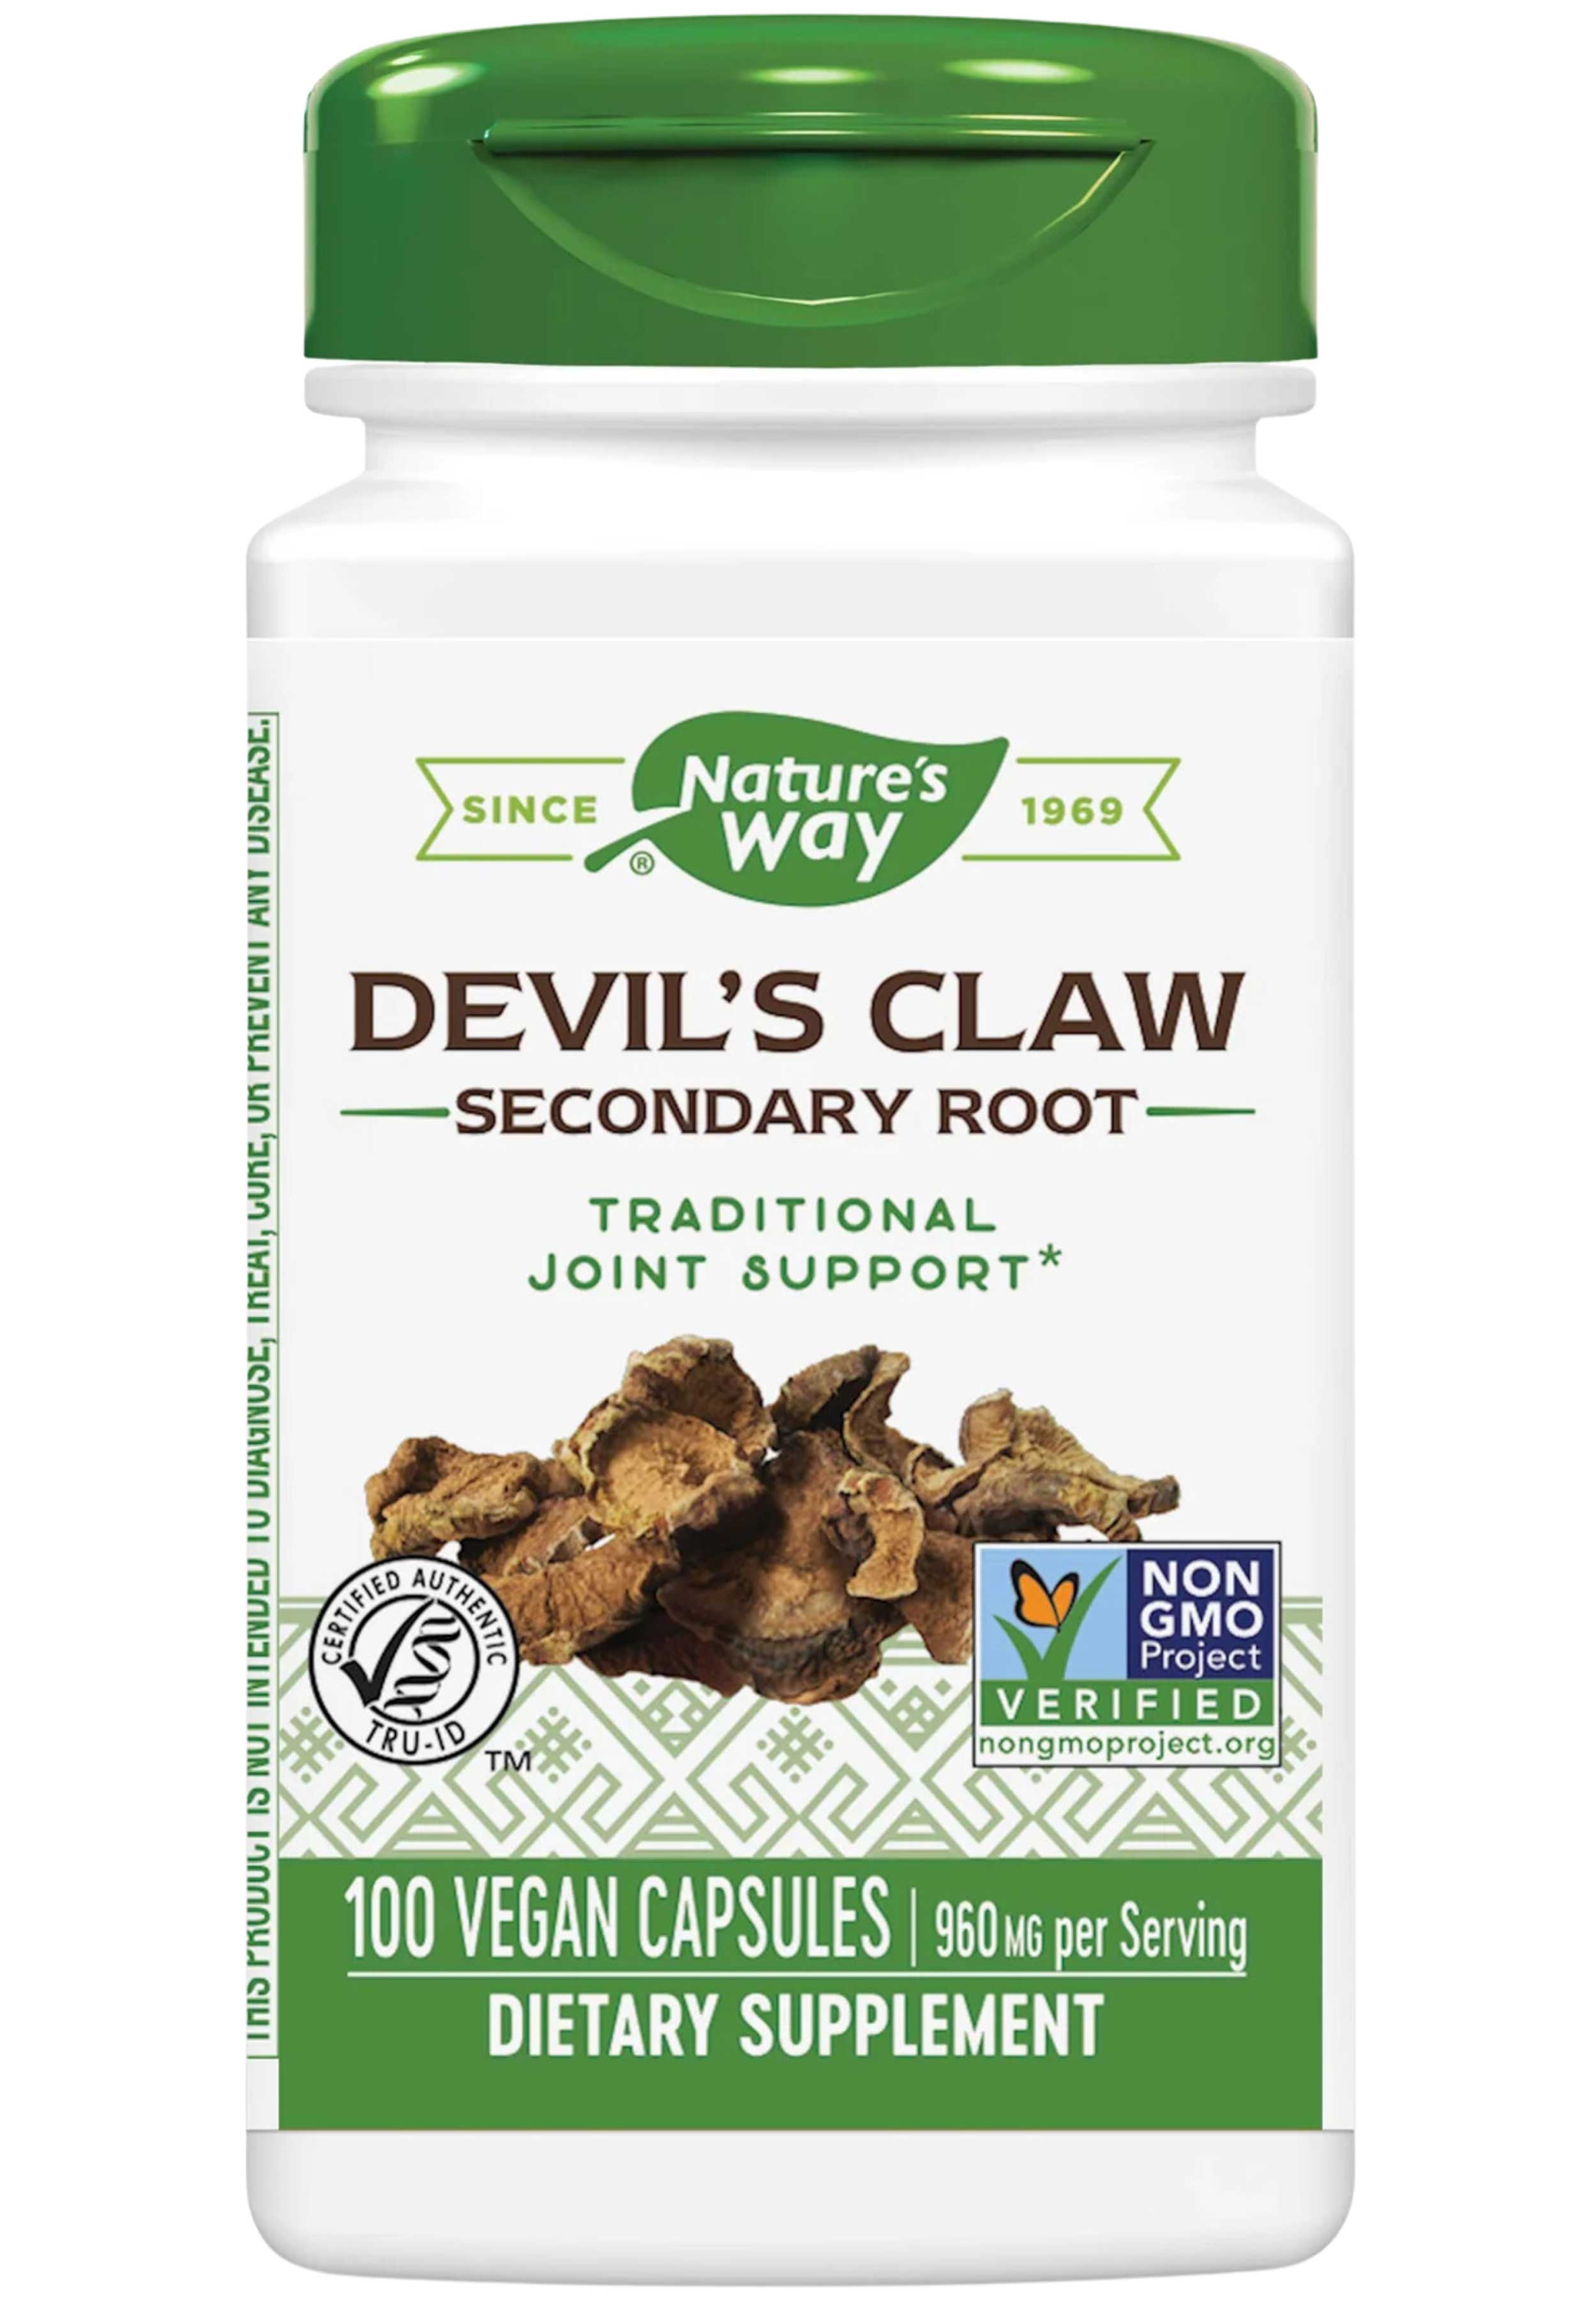 Nature's Way Devil's Claw Secondary Root